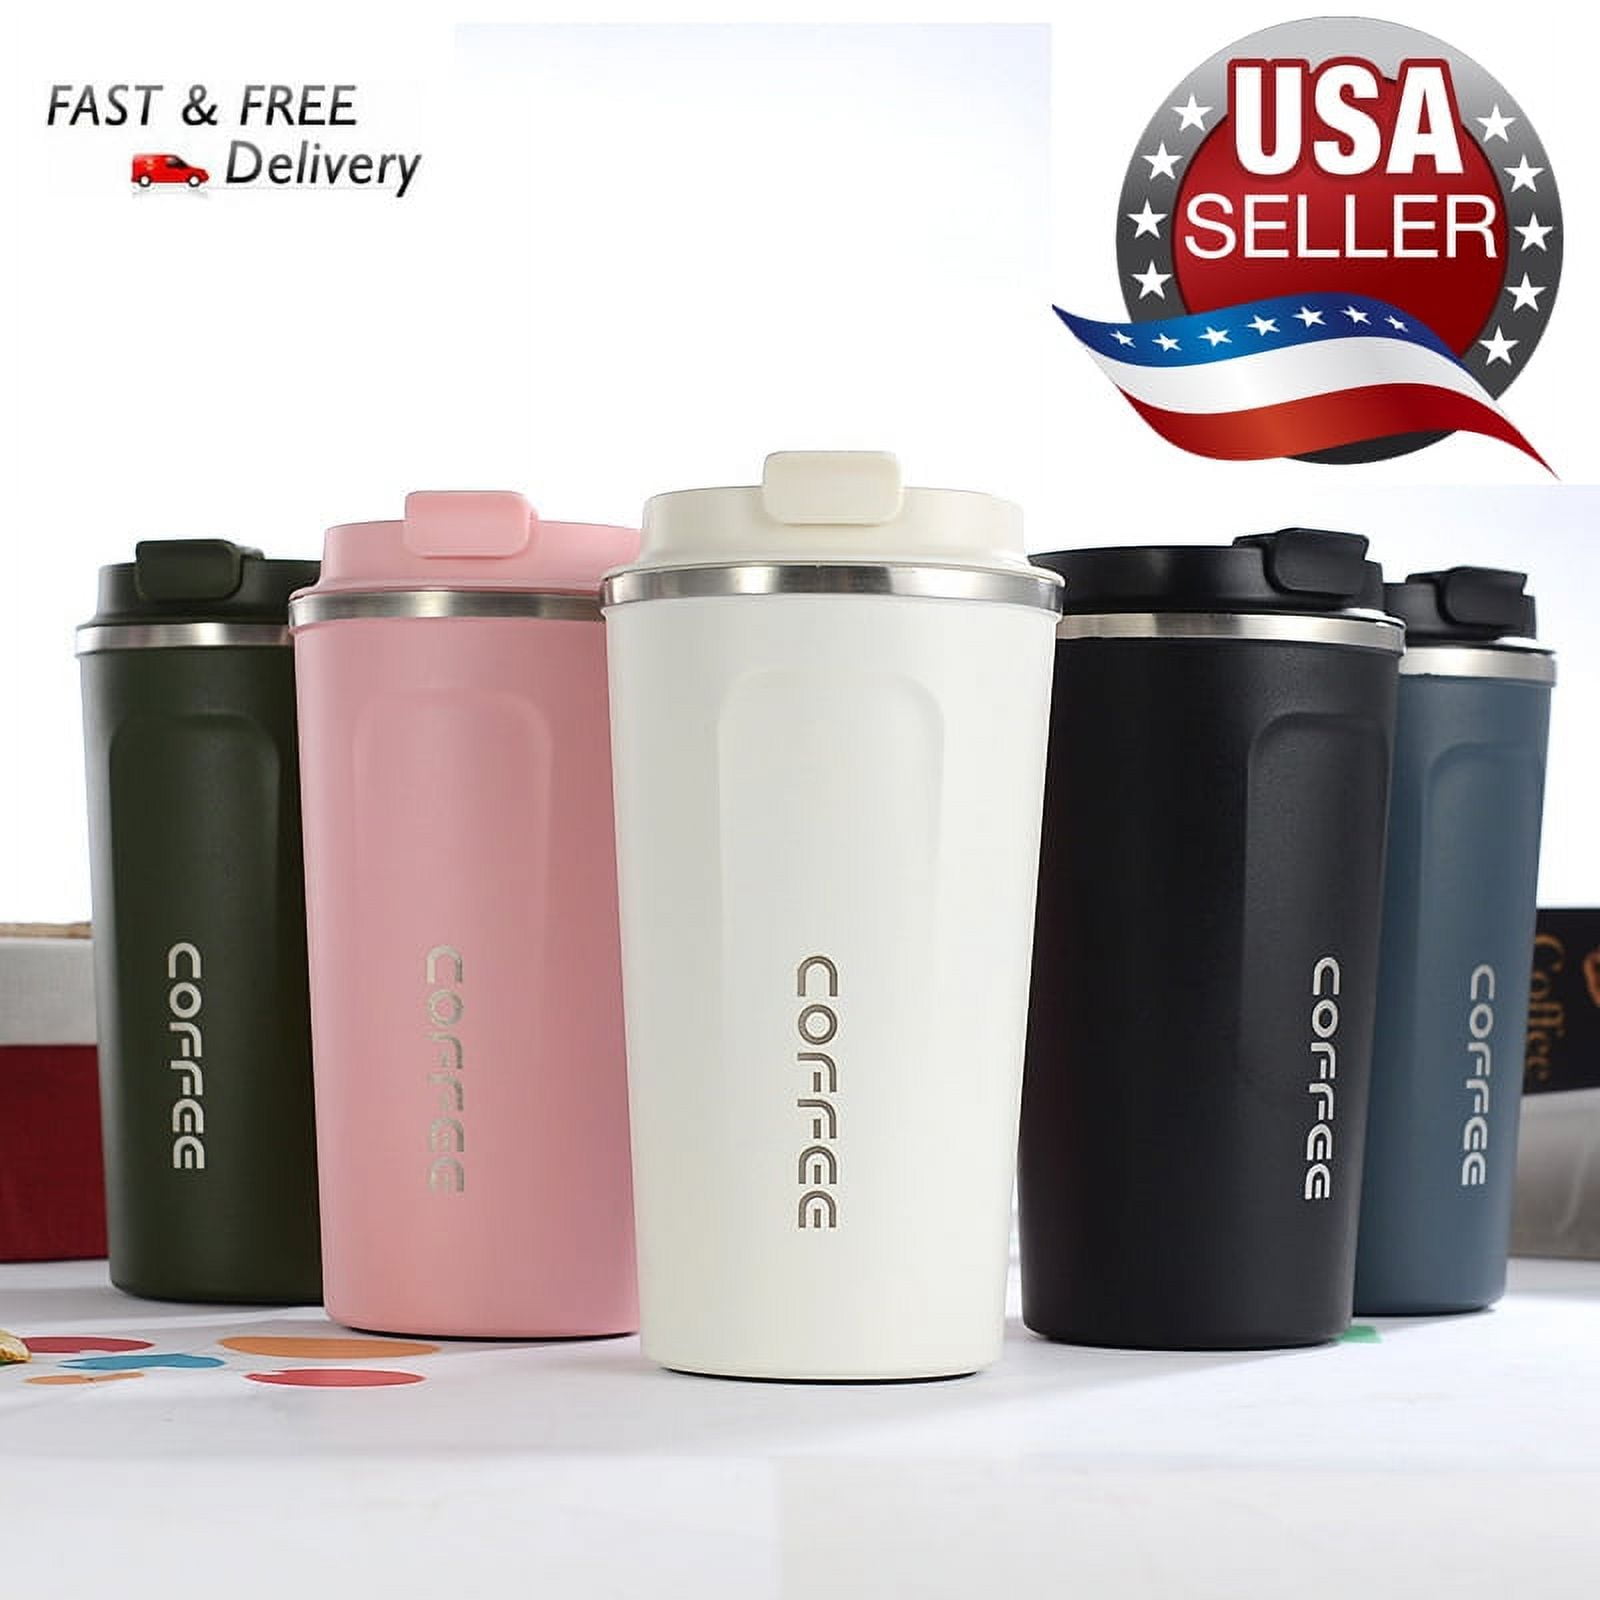 Eummy 510ml Smart Coffee Cup with Temperature Display Stainless Steel  Travel Mugs Leakproof Insulated Tea Cups Bottle for Camping Travel